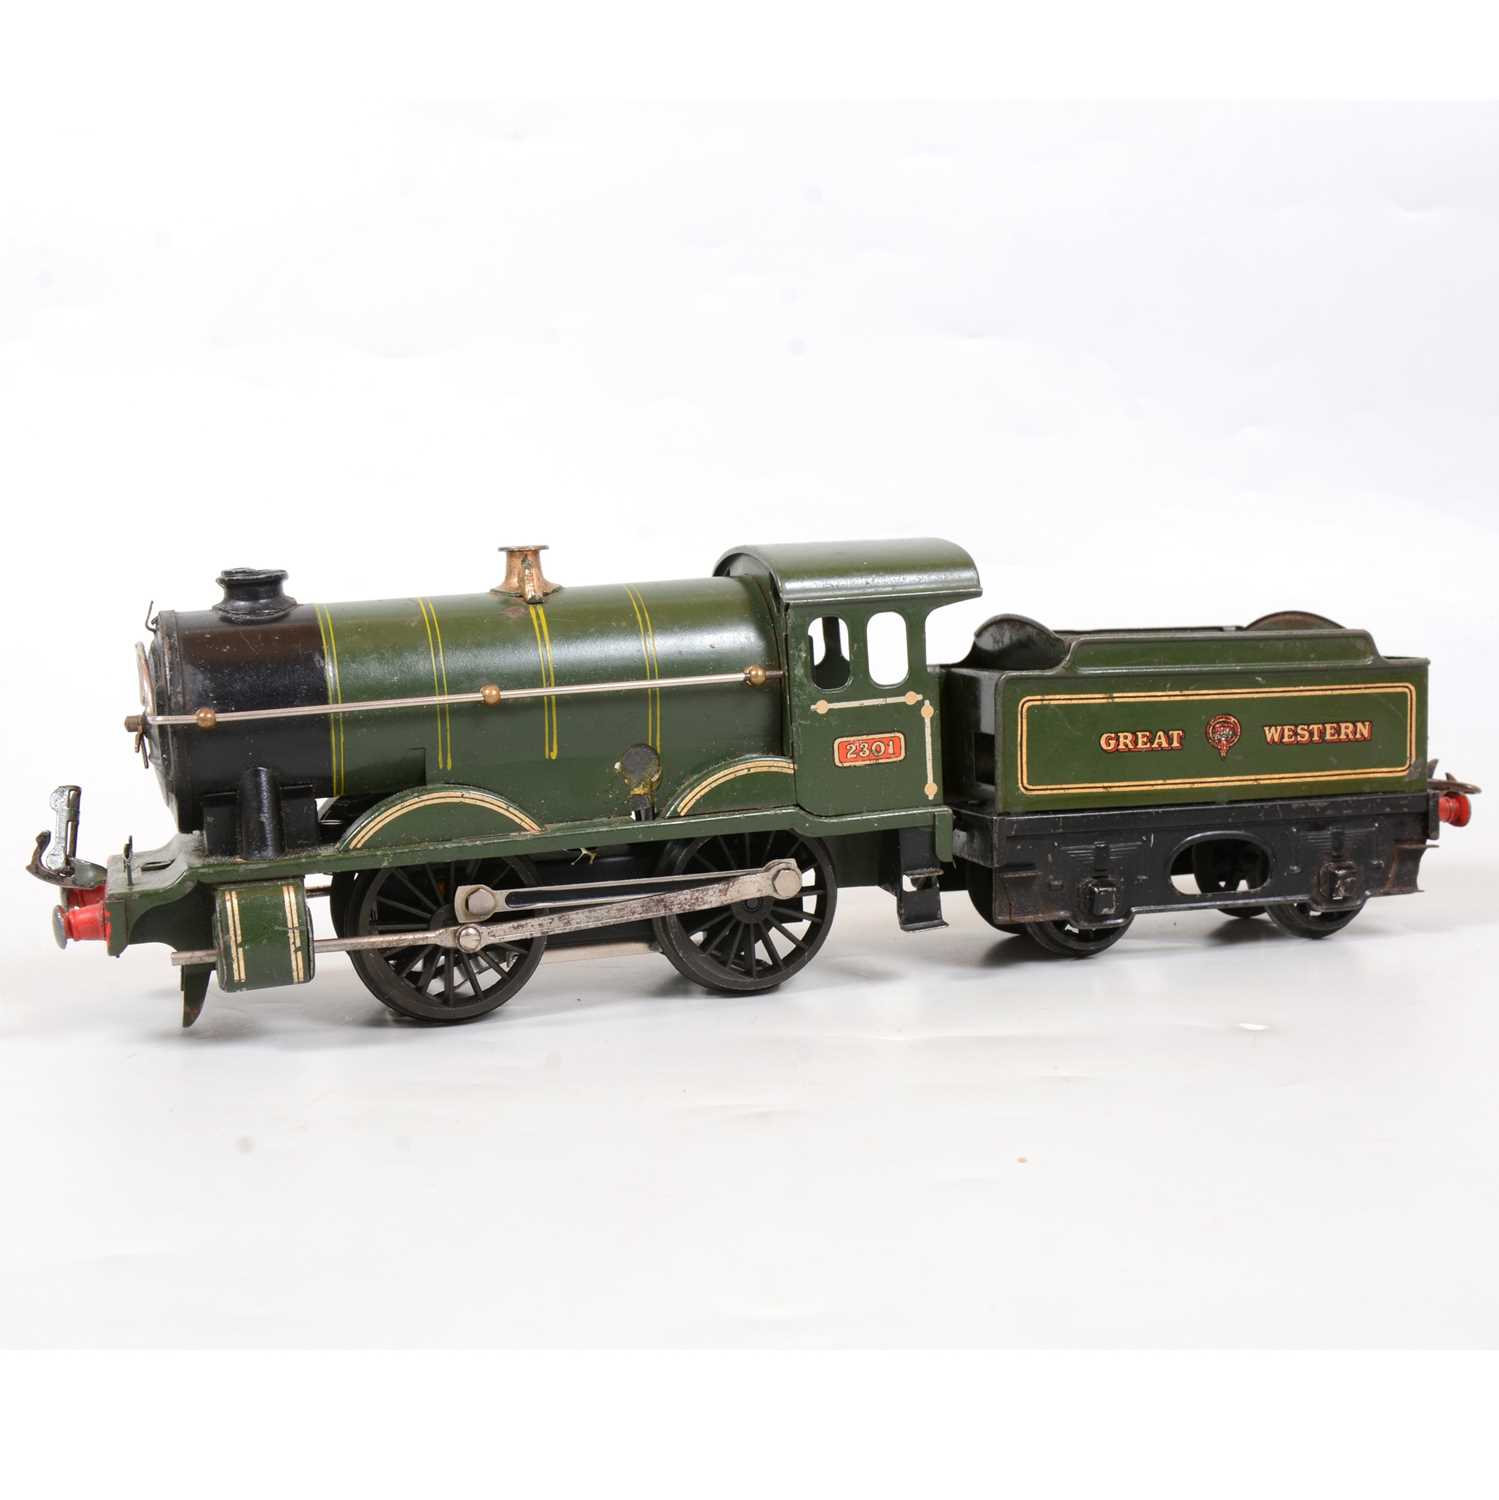 Lot 16 - Hornby O gauge locomotive and tender, converted to electric no.1 Special, GW 0-4-0, 2301.